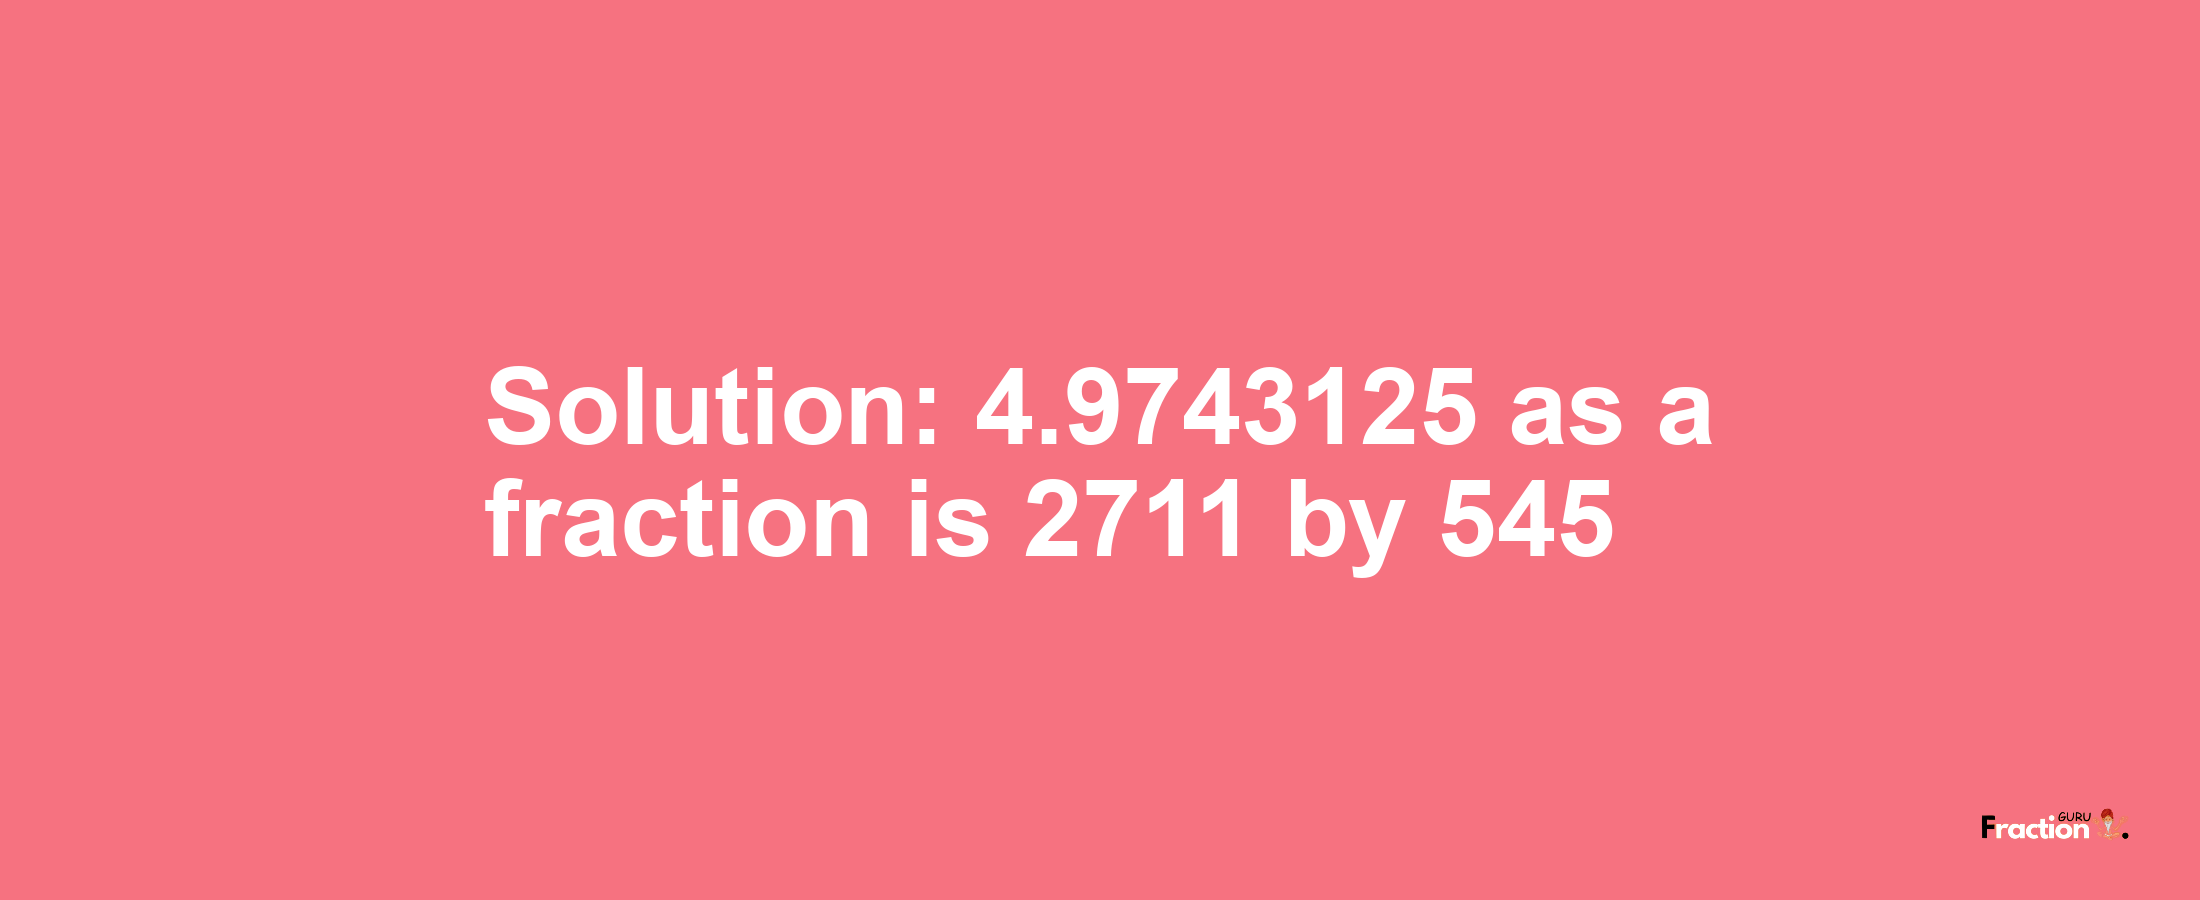 Solution:4.9743125 as a fraction is 2711/545